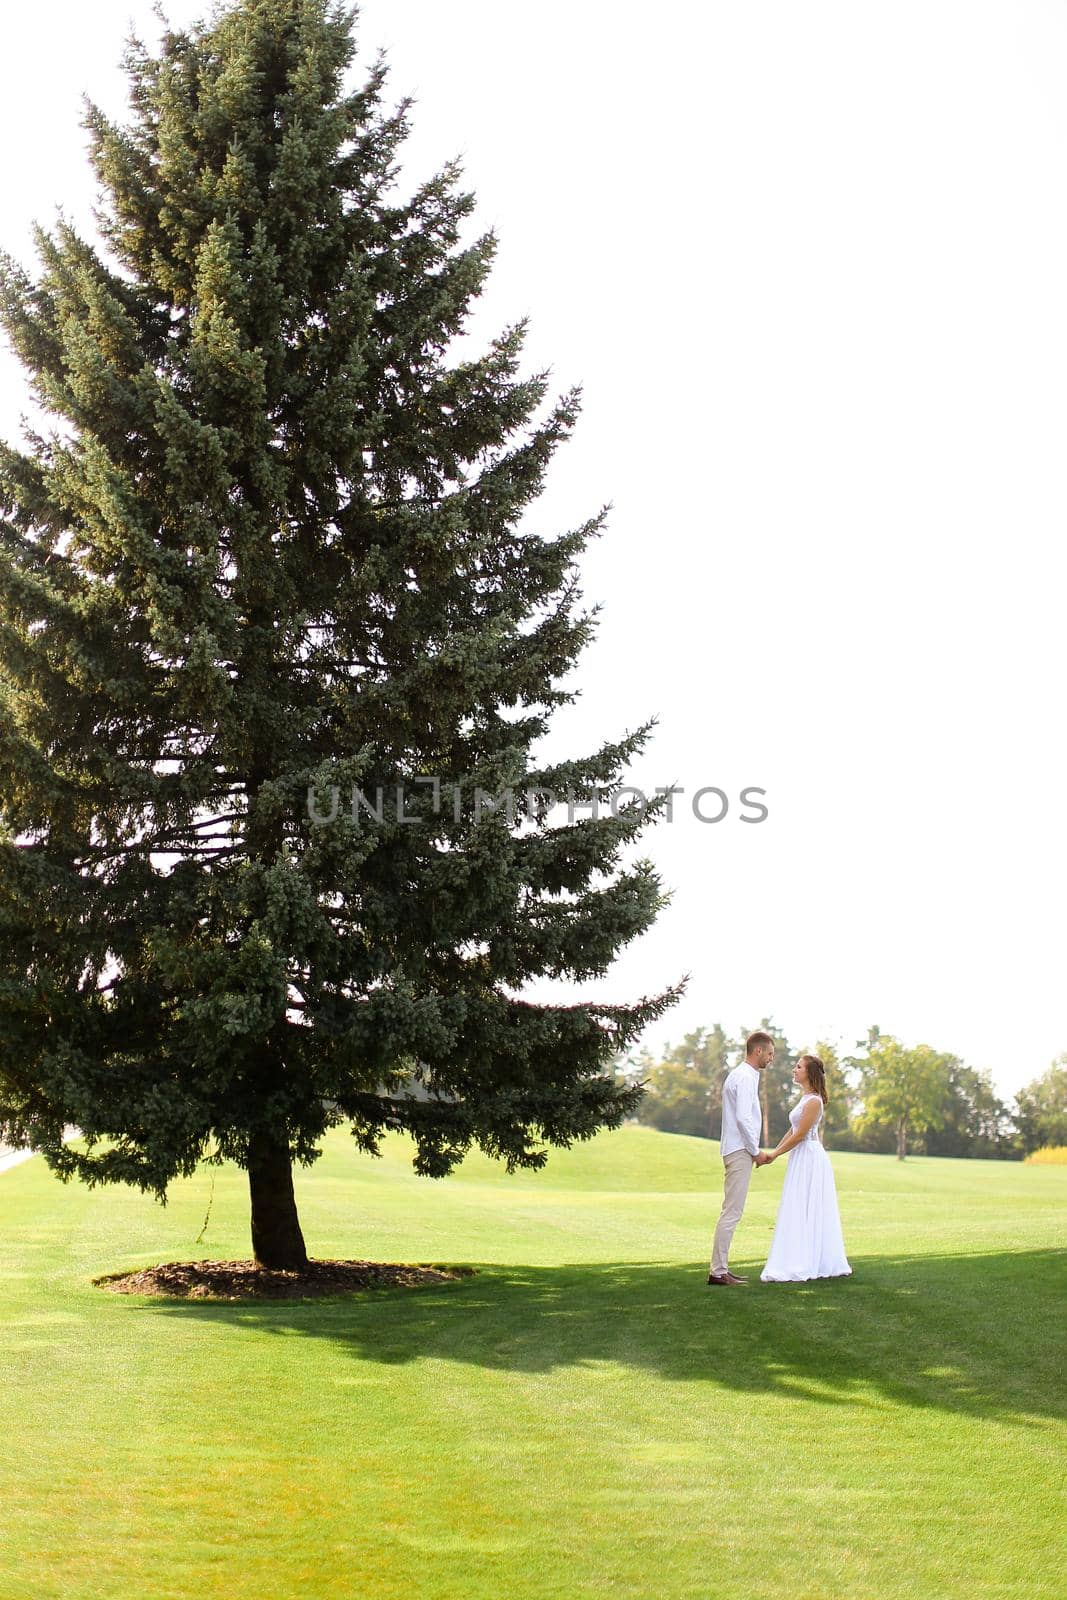 Young american bride and groom walking near green big spruce on grass in white sky background. by sisterspro